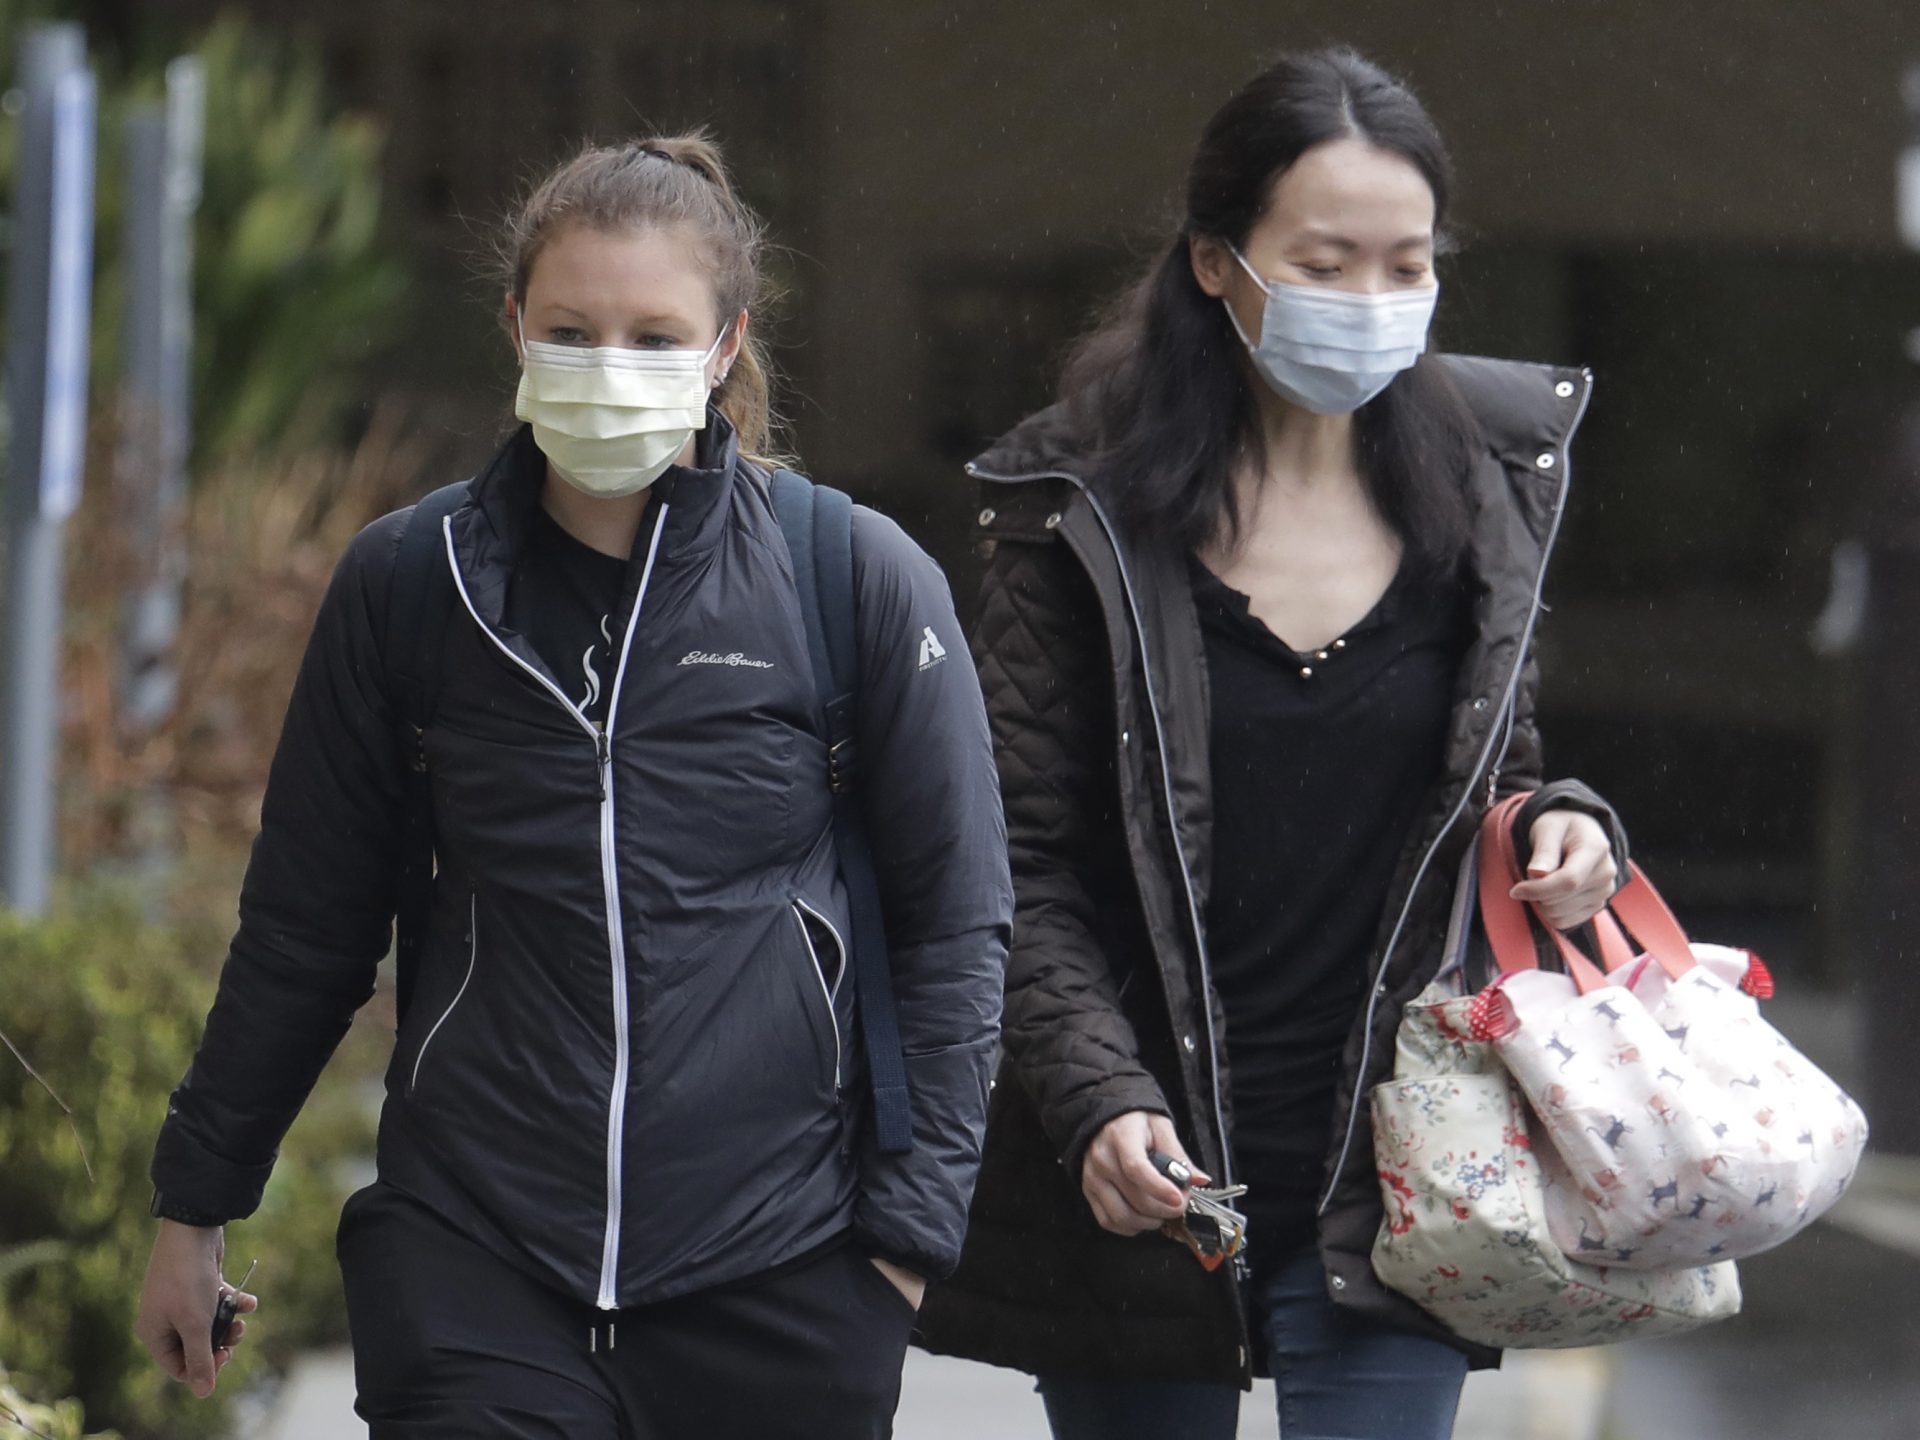 Two women wearing masks walk away from the Life Care Center in Kirkland, Wash., near Seattle, where health officials are monitoring patients. An outbreak of the coronavirus is cited as the cause for two  deaths of patients who received care at the center.